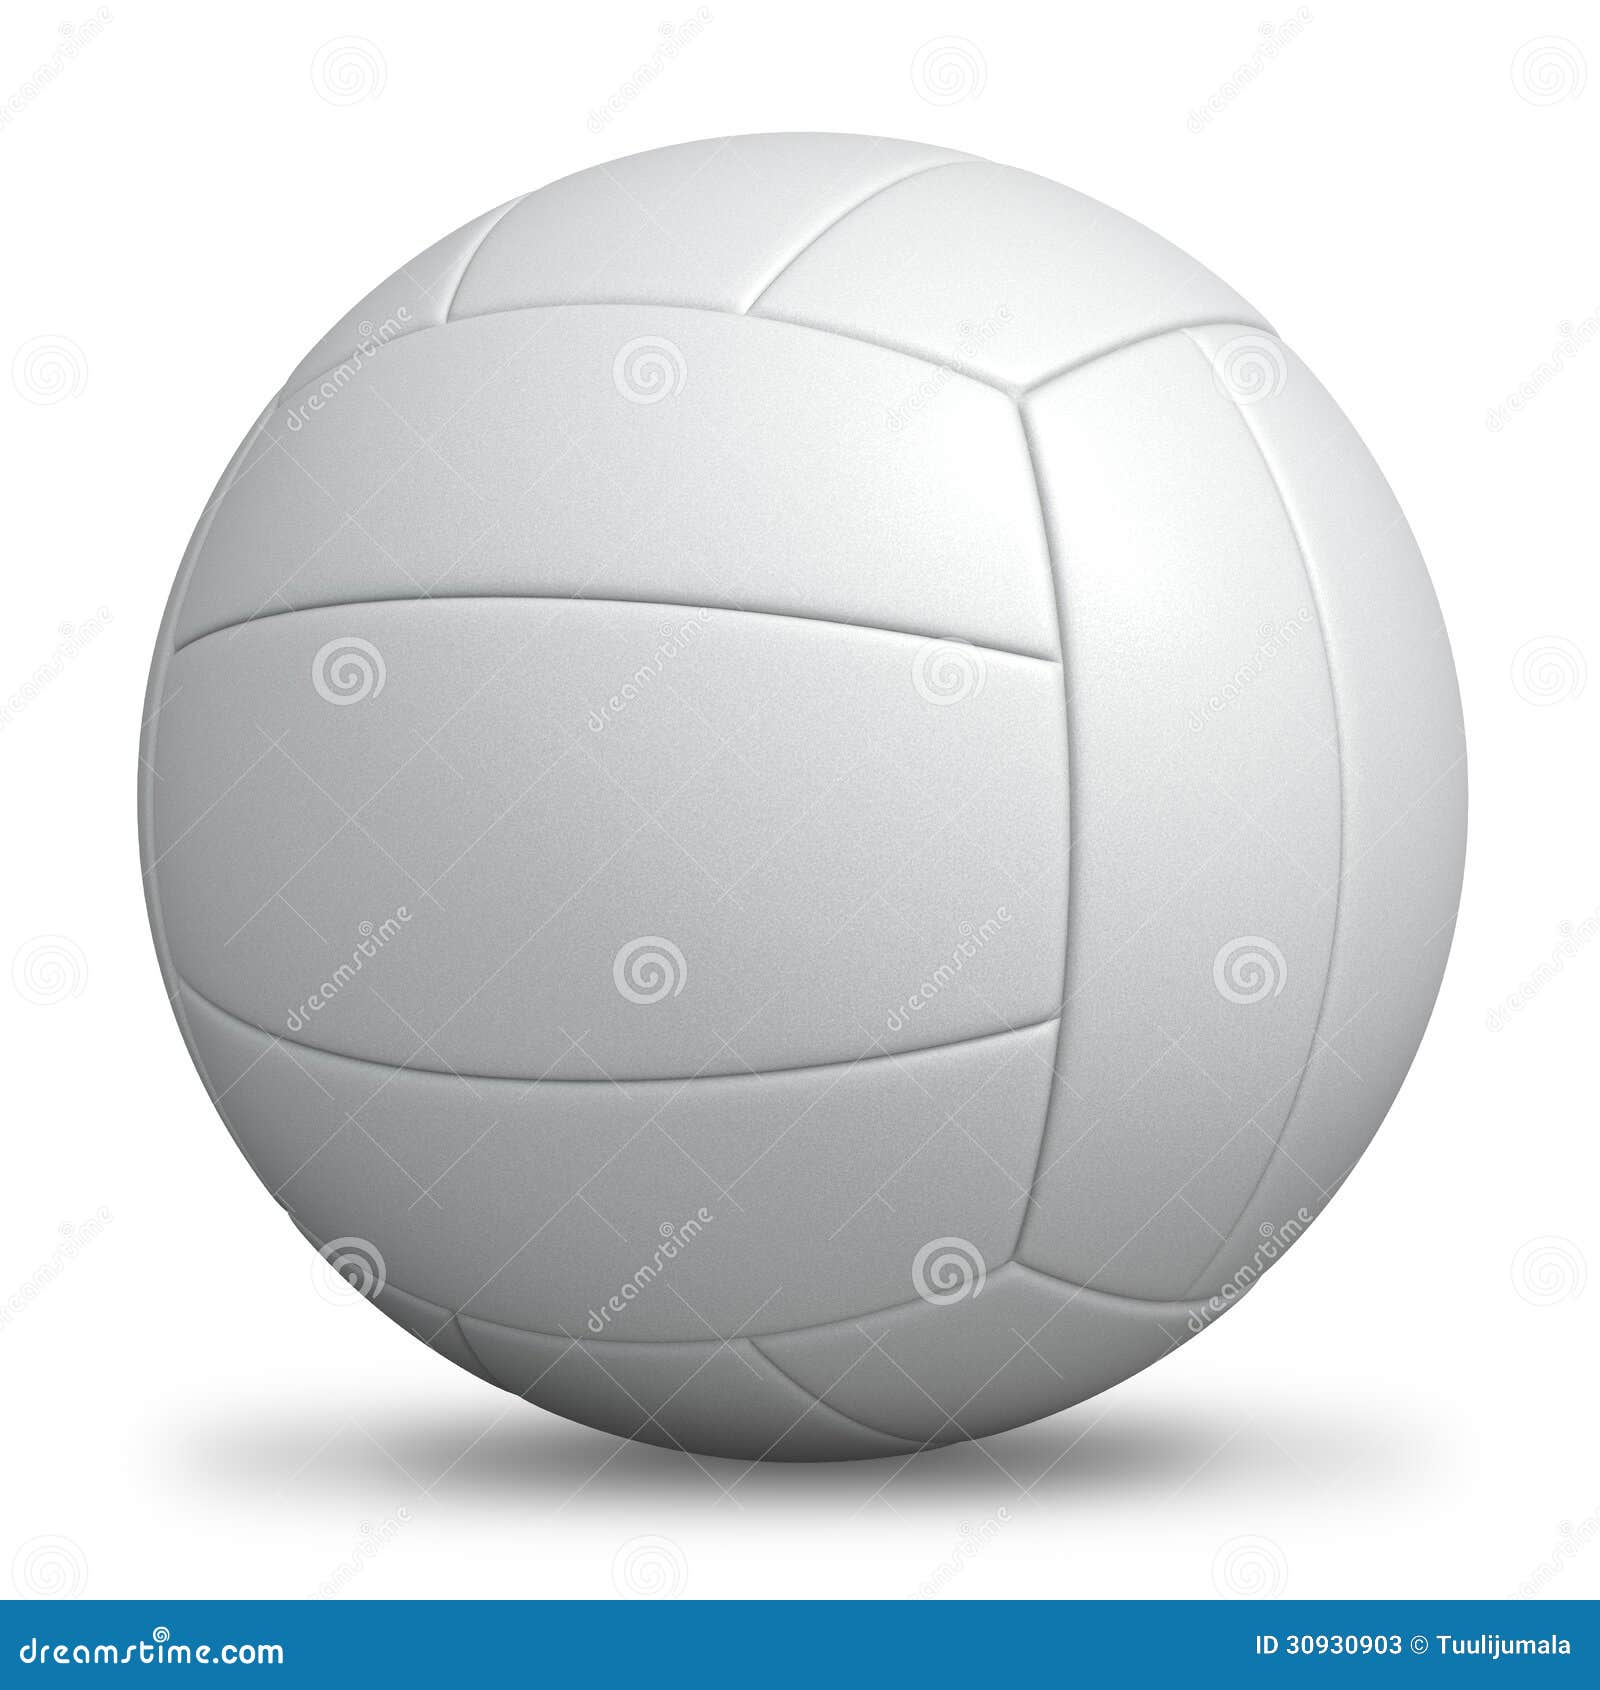 volleyball clipart no background - photo #11